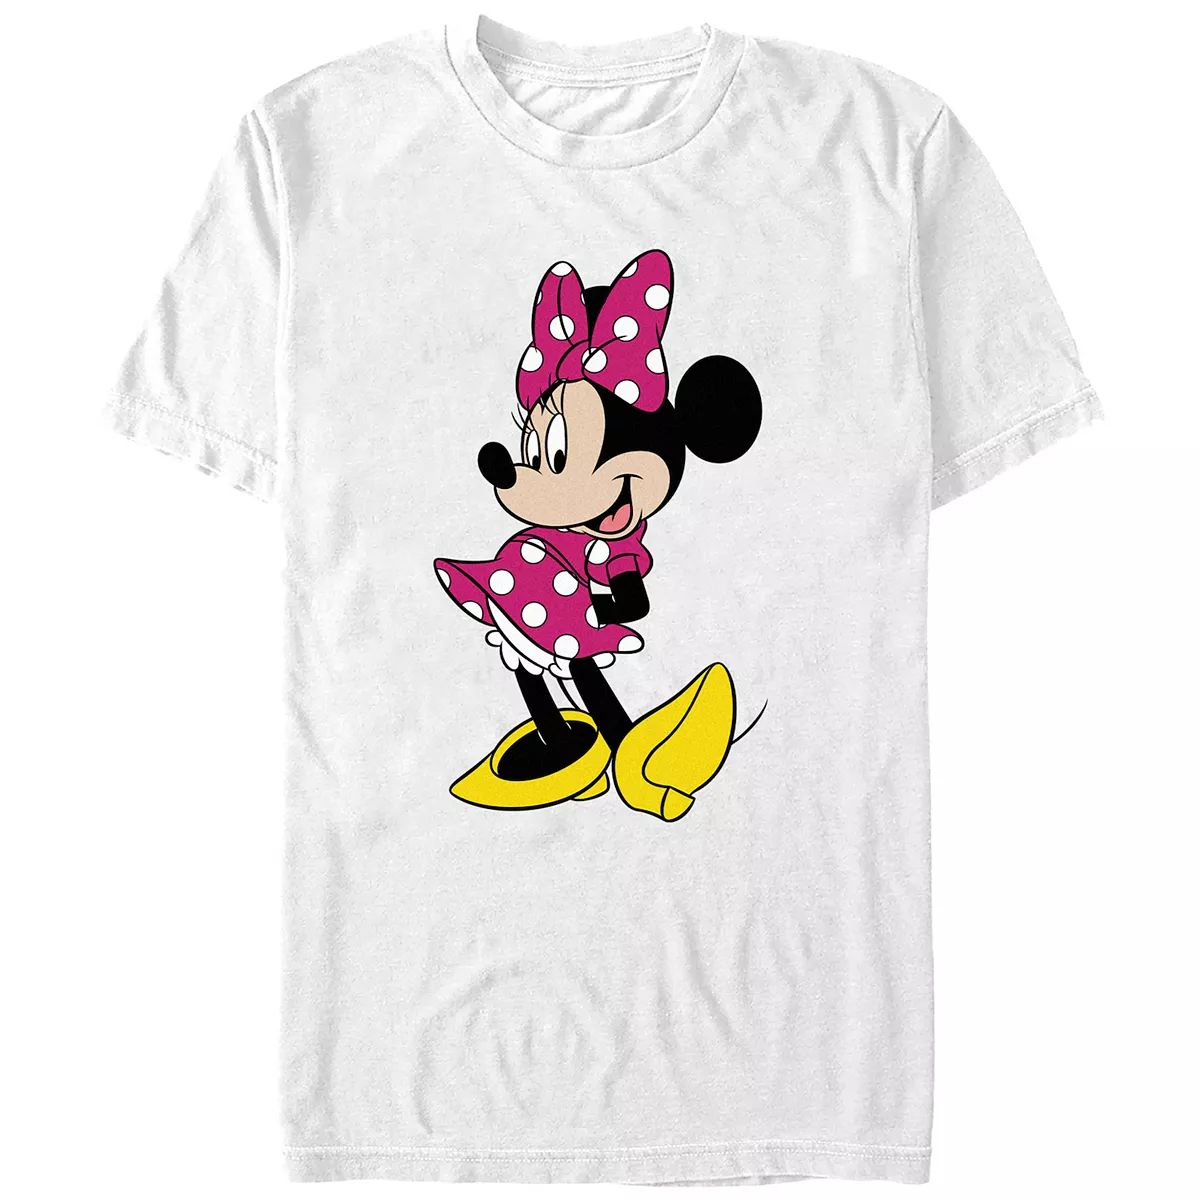 Disney's Minnie Mouse Wearing Pink Polka Dot Dress Juniors' Graphic Tee | Kohl's